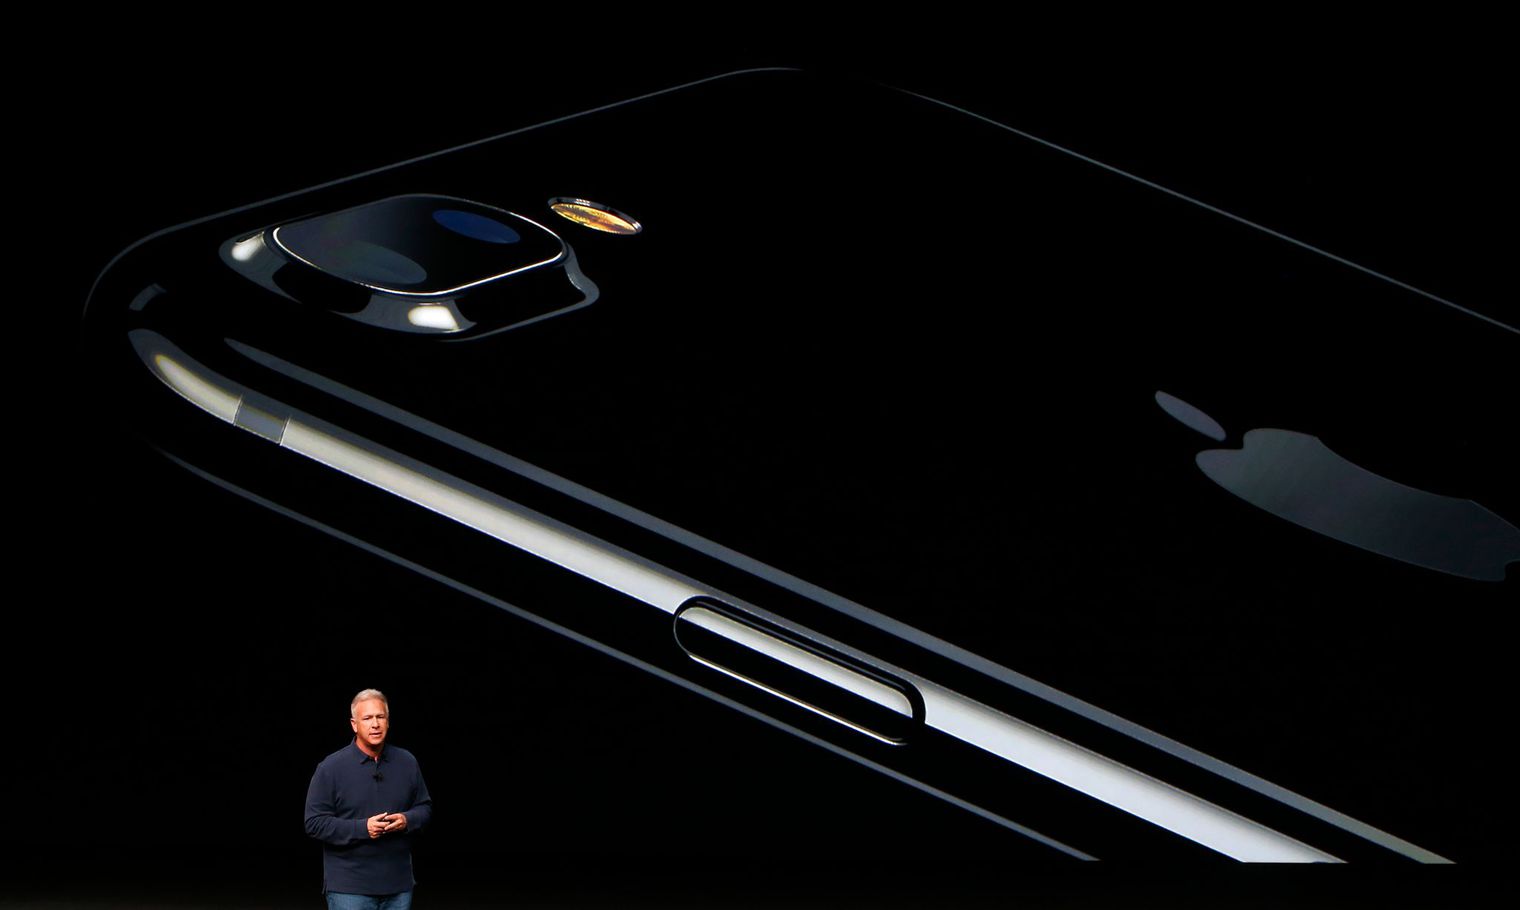 phil schiller discusses the iphone 7 during a media event in san francisco 5664891